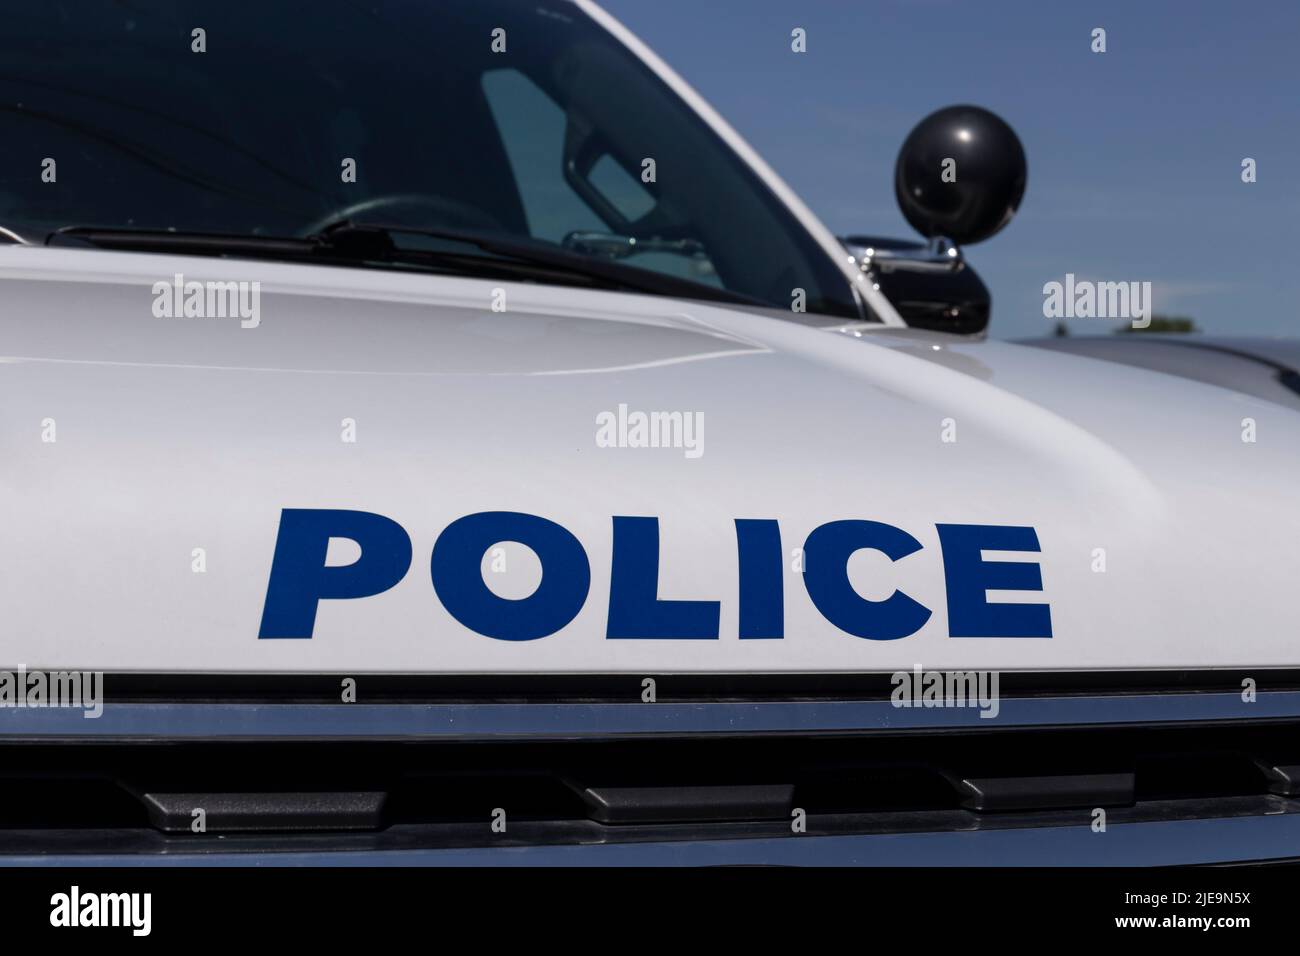 POLICE printed on the front of a police car in blue text and a spotlight in the background. Stock Photo